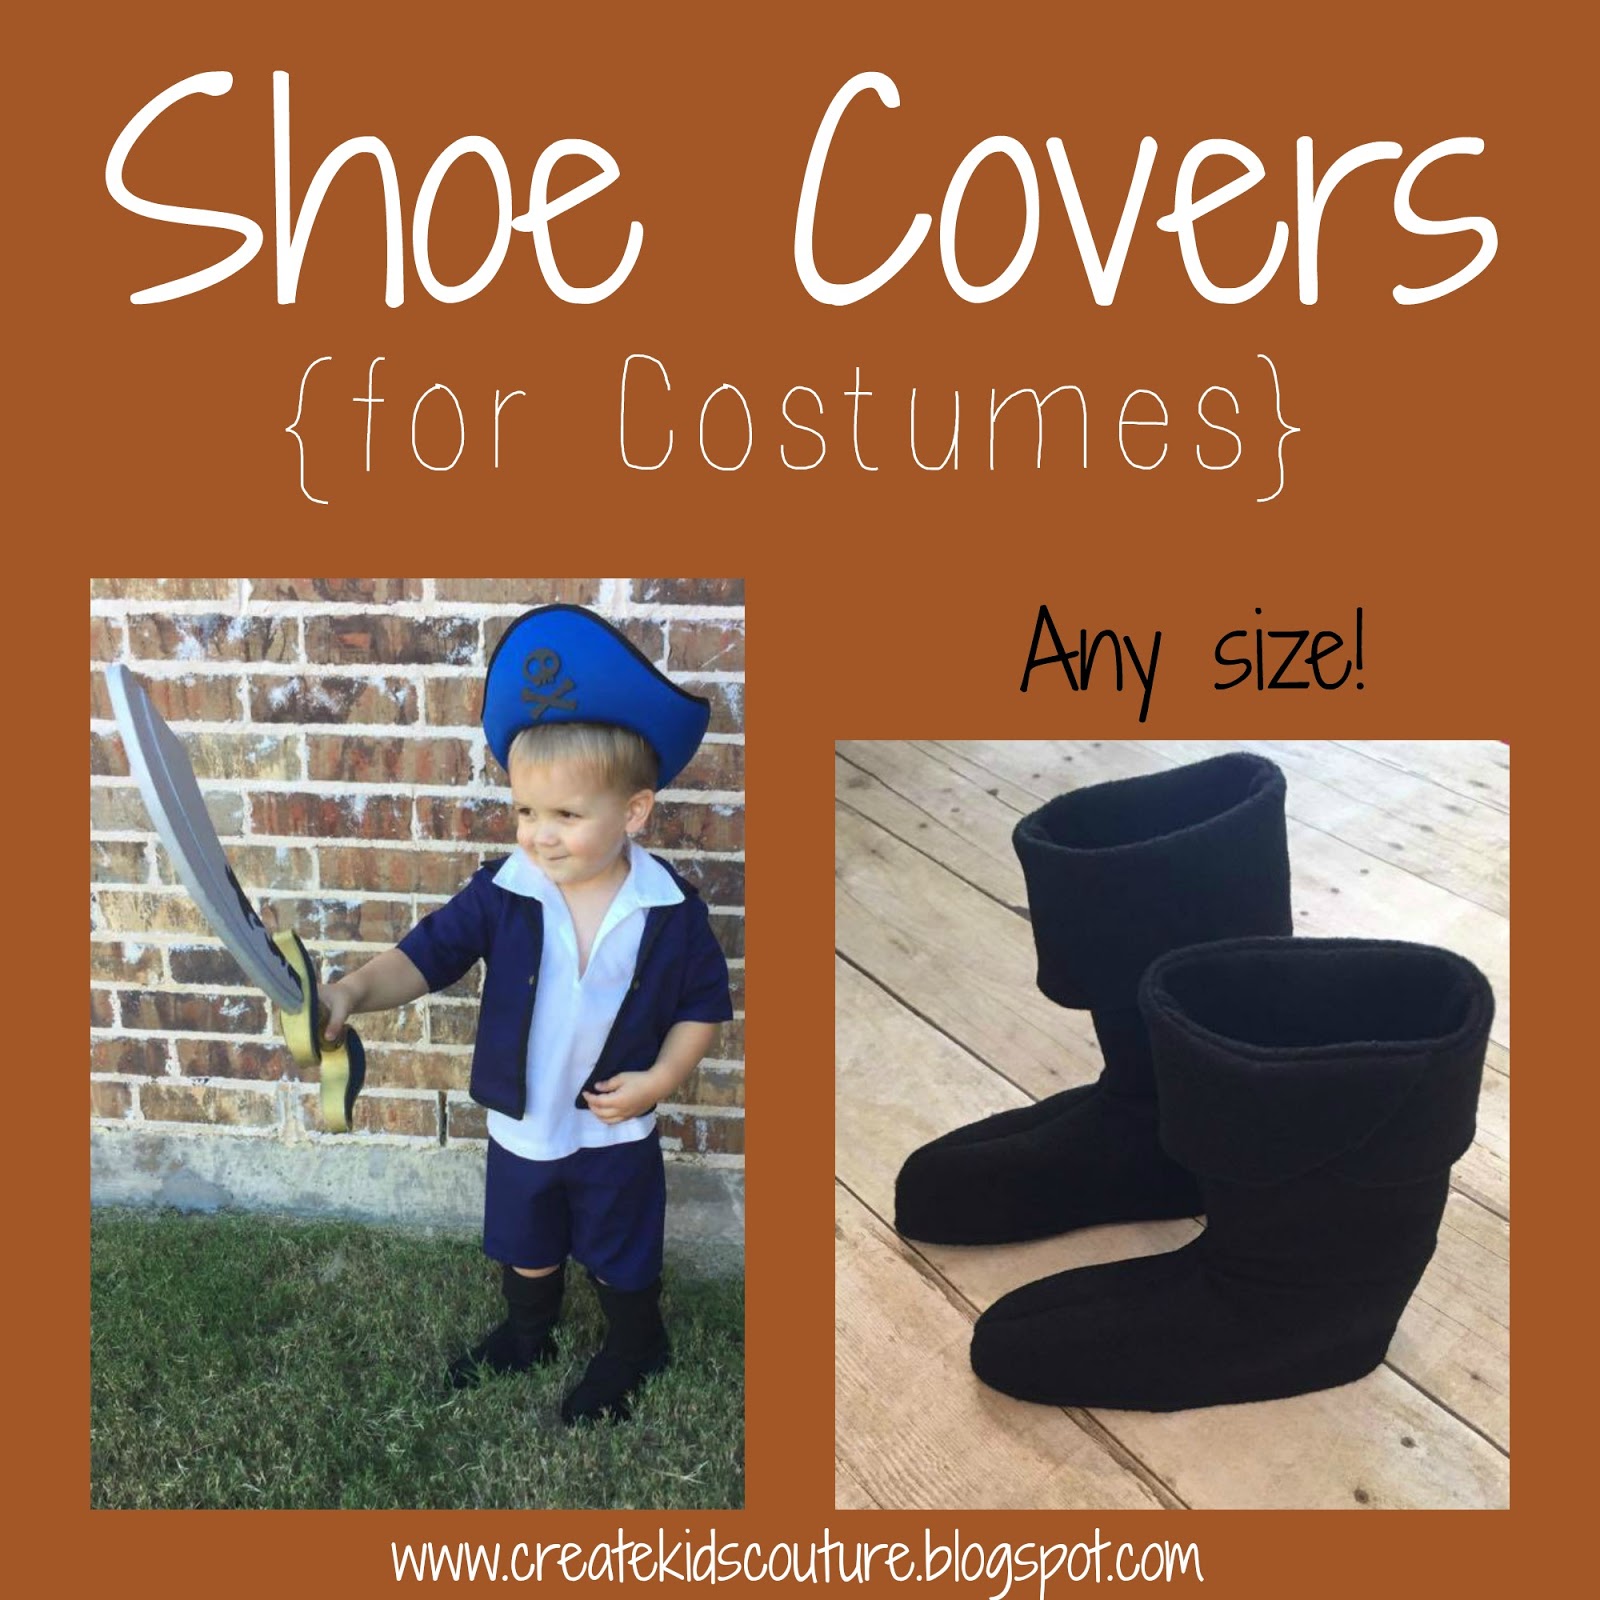 Shoe Covers for Costumes